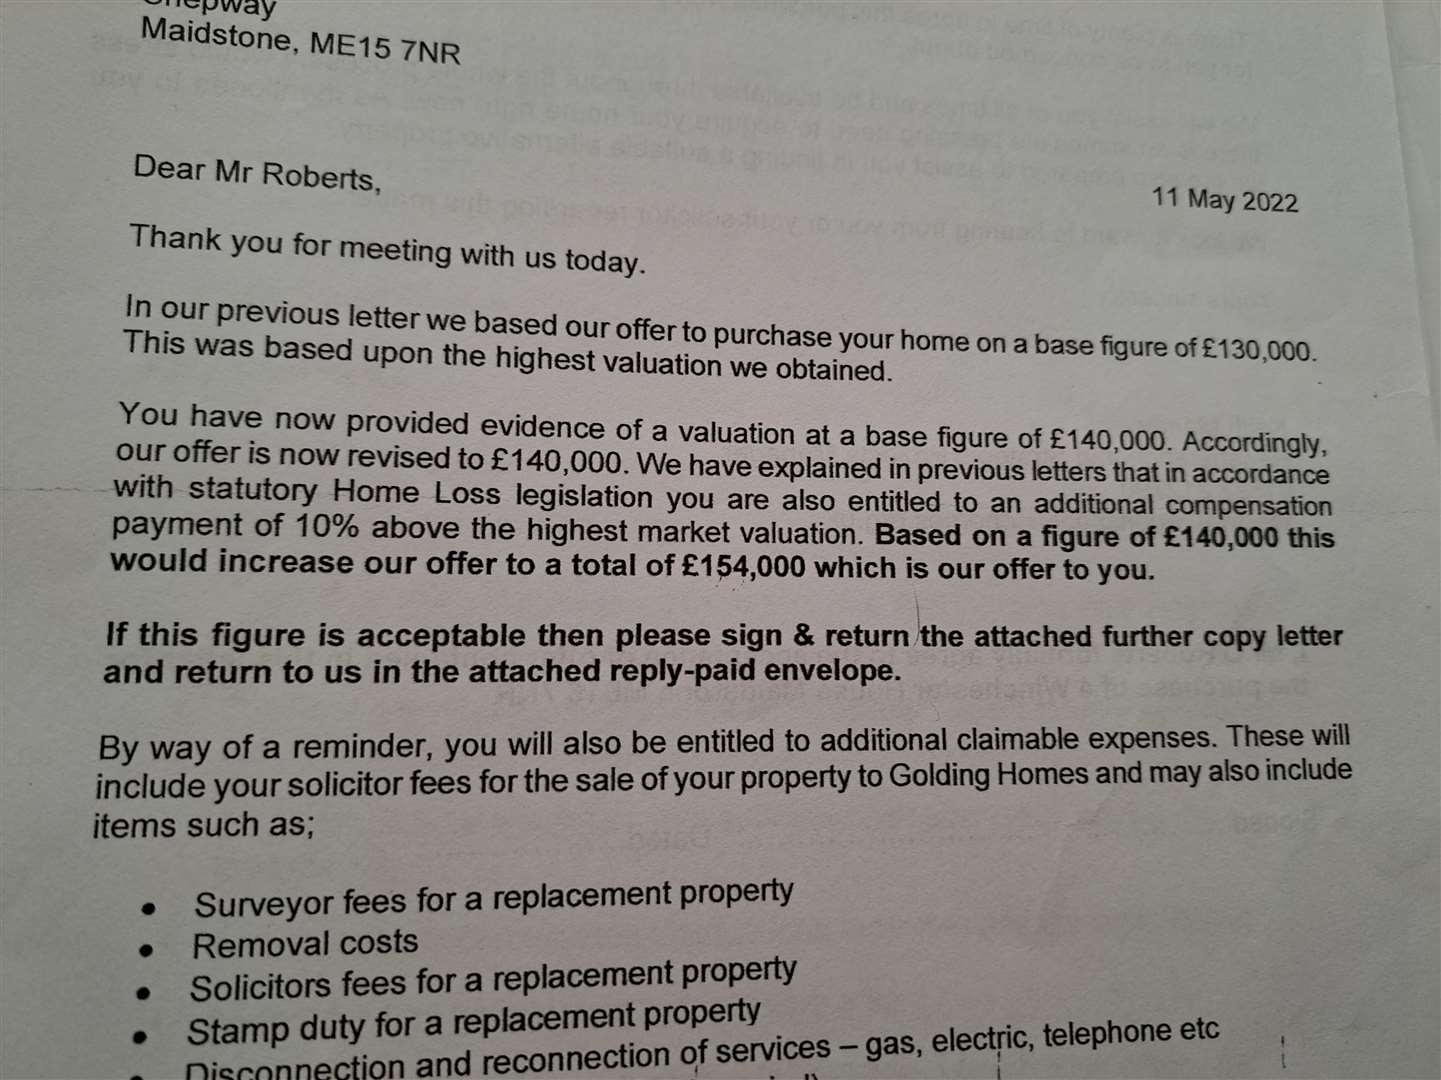 A letter from Golding Homes offering Mr Roberts £154,000 for his flat